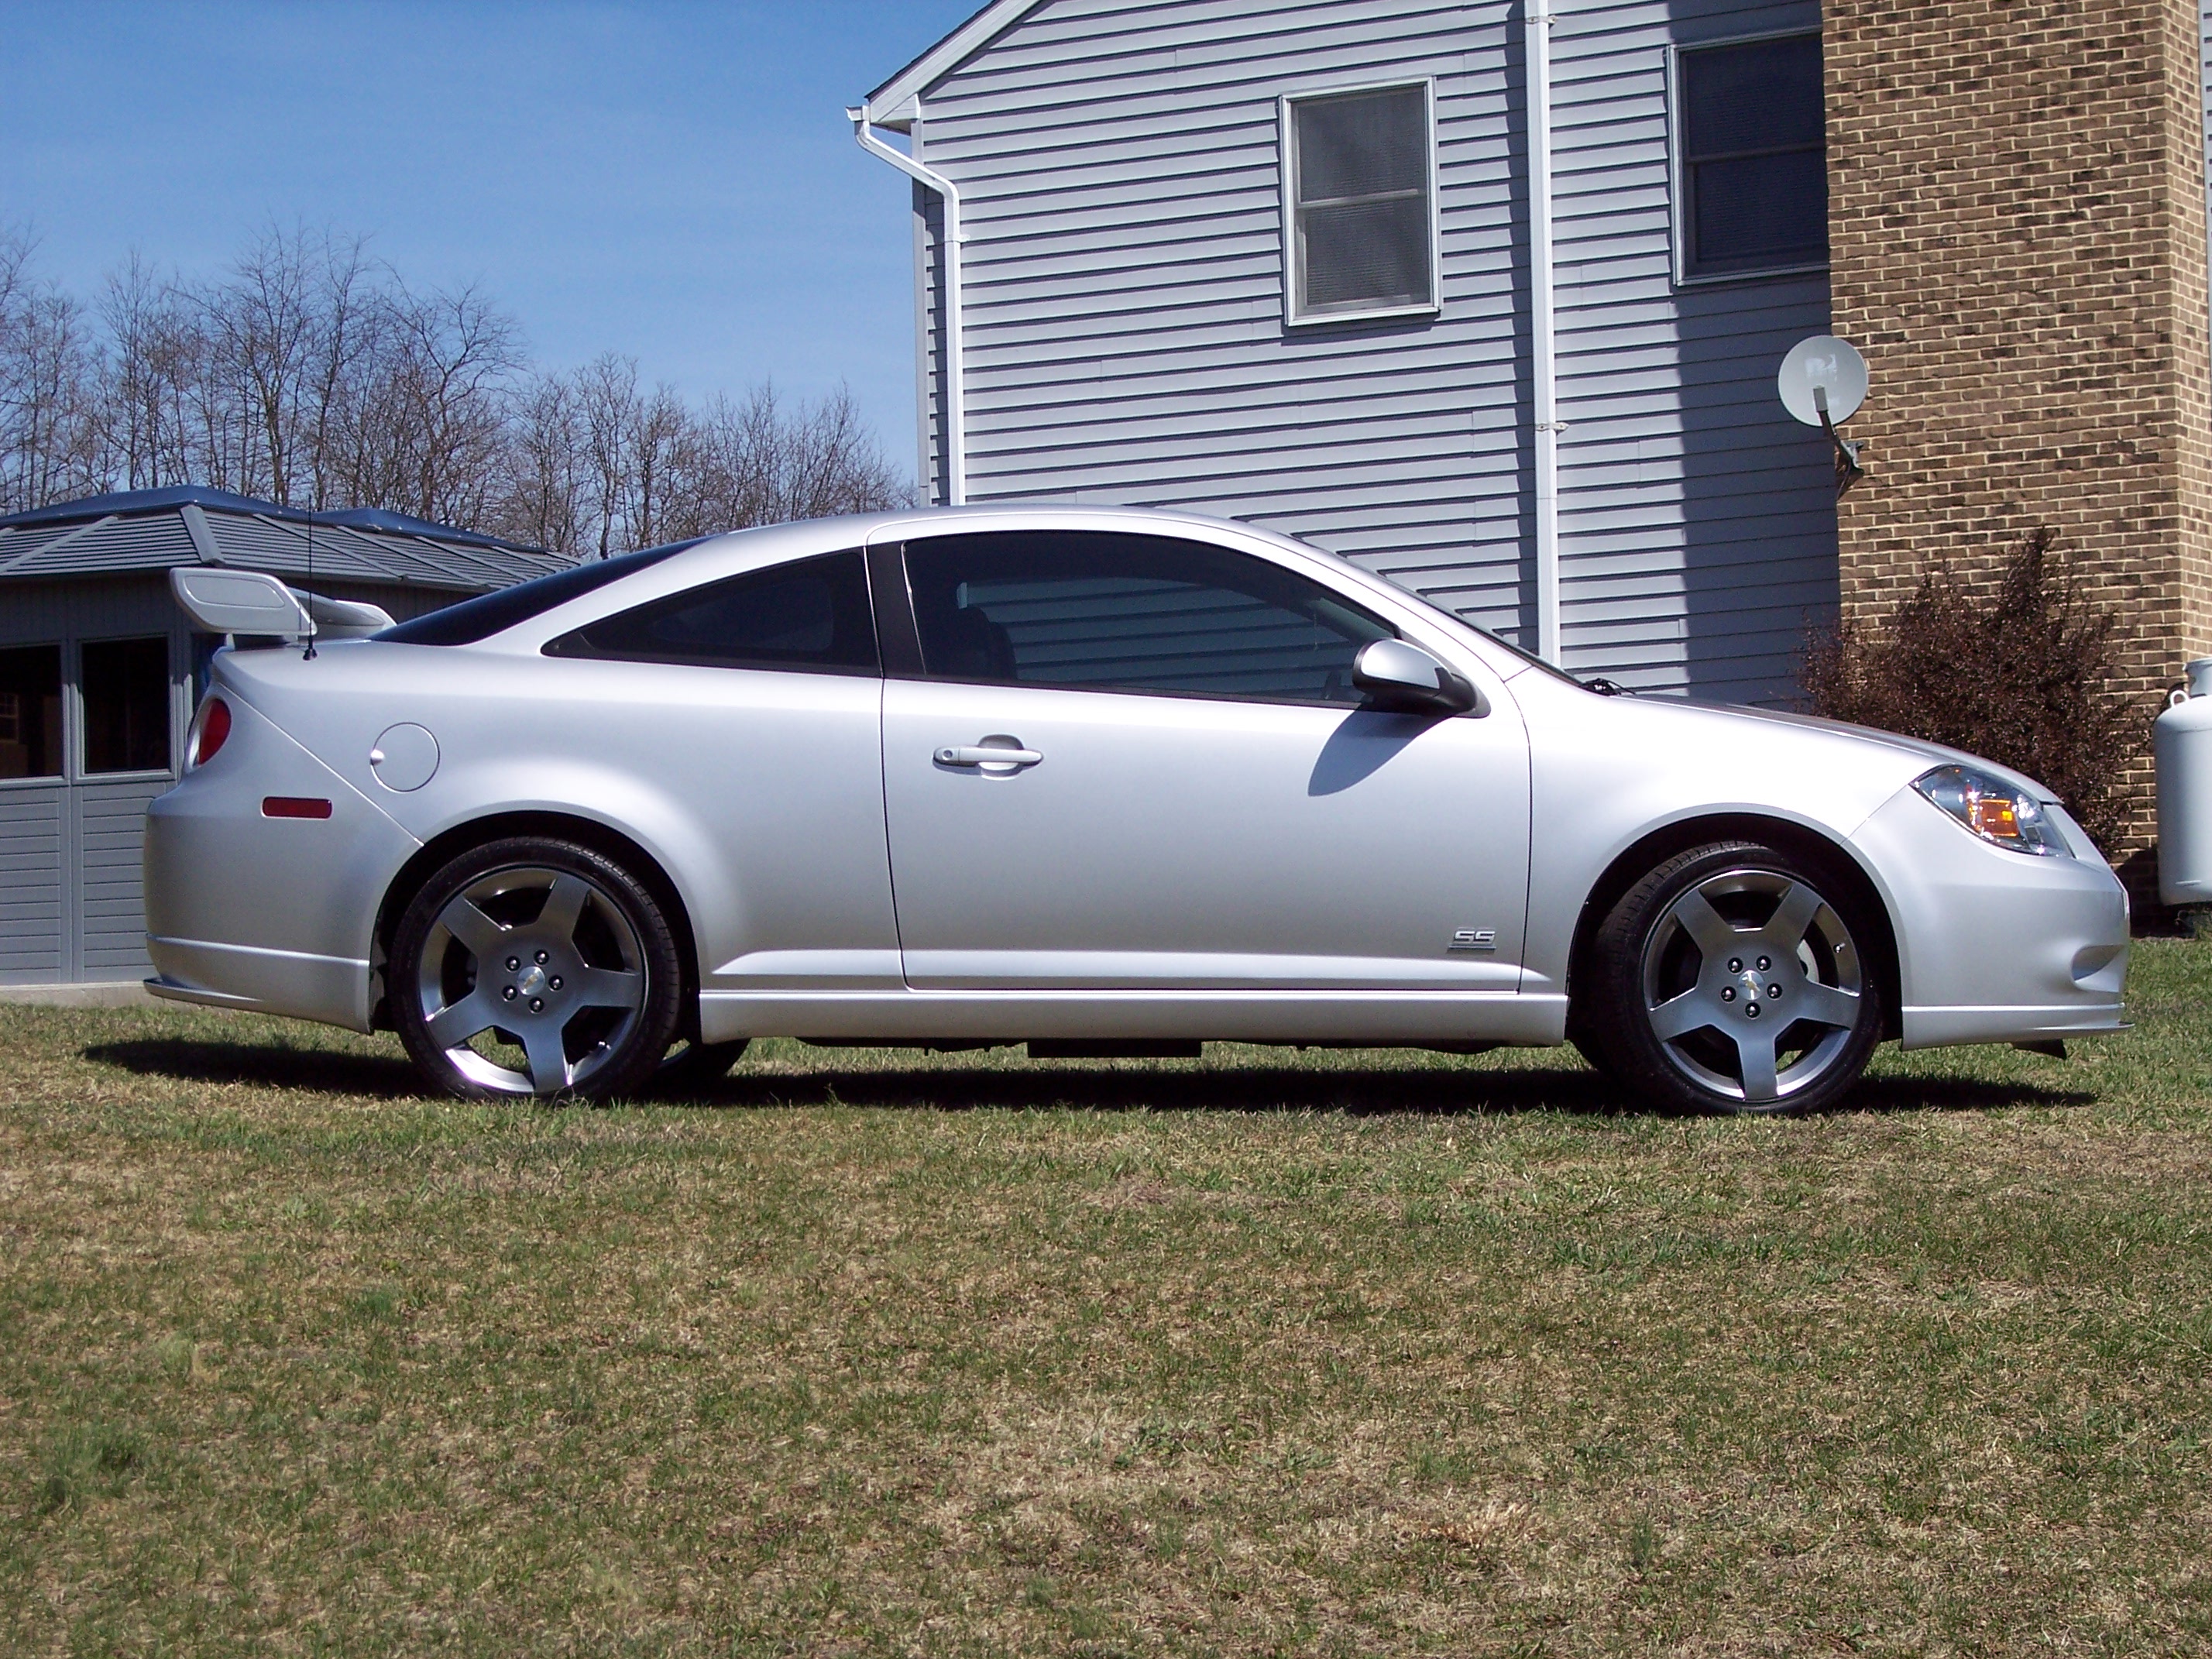 Chevy Cobalt Ss 0 60 by 2006 Chevrolet Cobalt Ss Sc 1 4 Mile Trap...